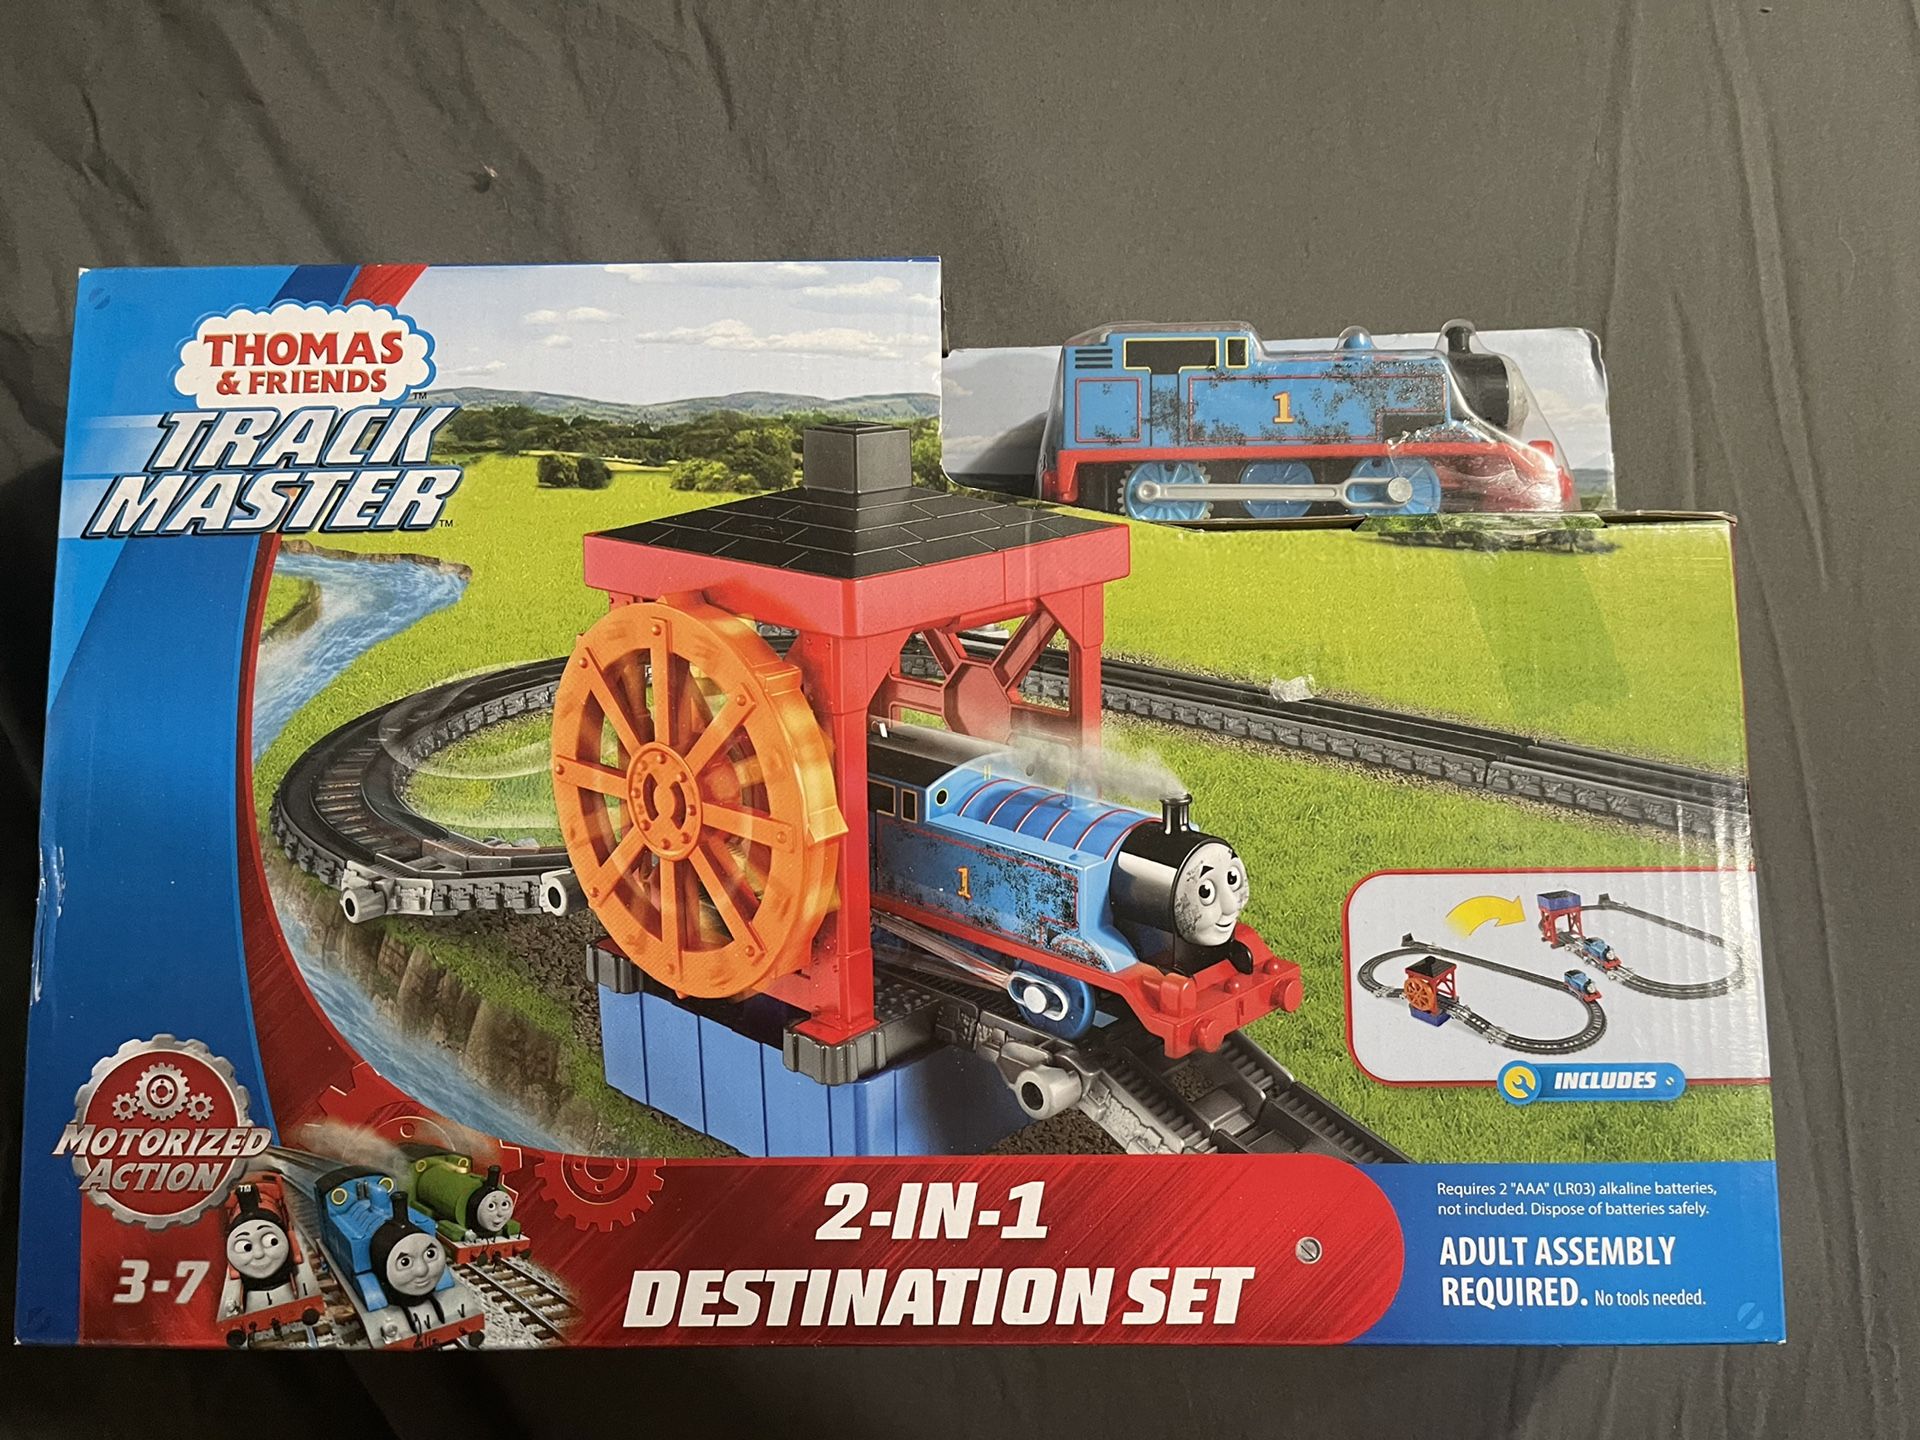 Fisher-Price Thomas & Friends TrackMaster 2-in-1 Destination Set New in Box